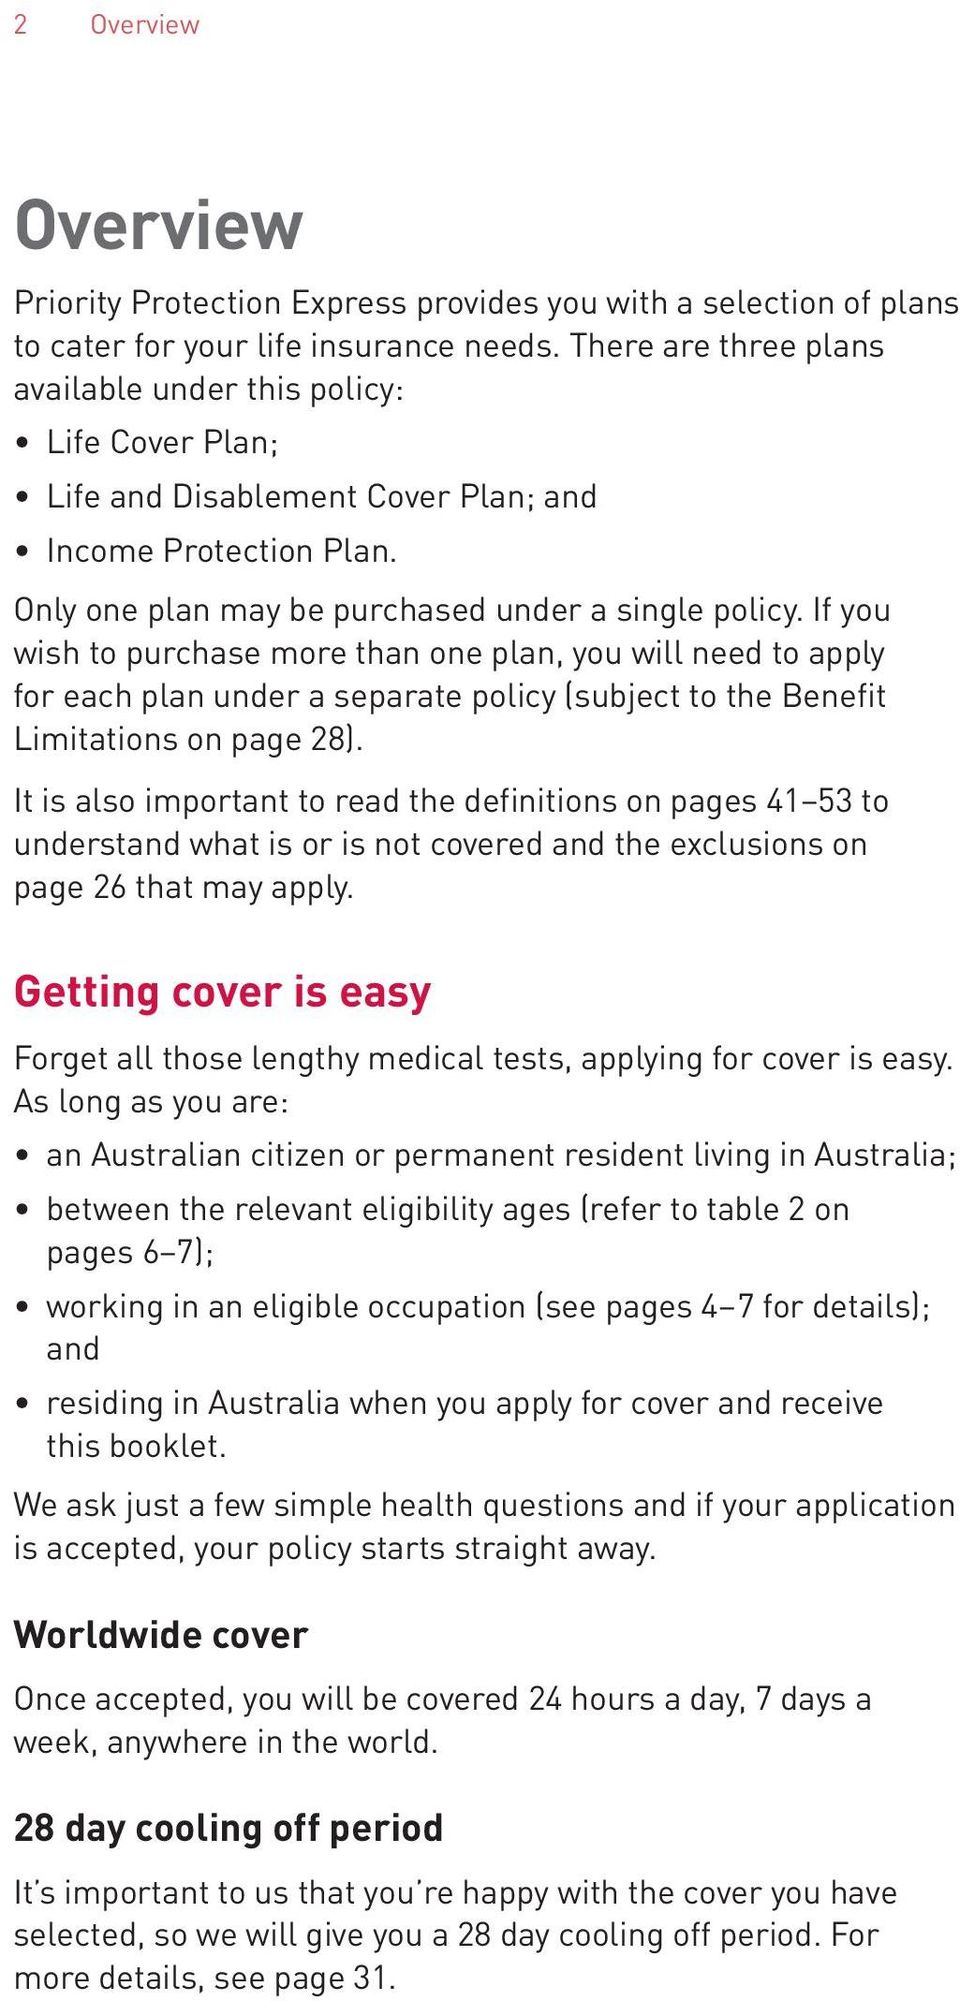 If you wish to purchase more than one plan, you will need to apply for each plan under a separate policy (subject to the Benefit Limitations on page 28).